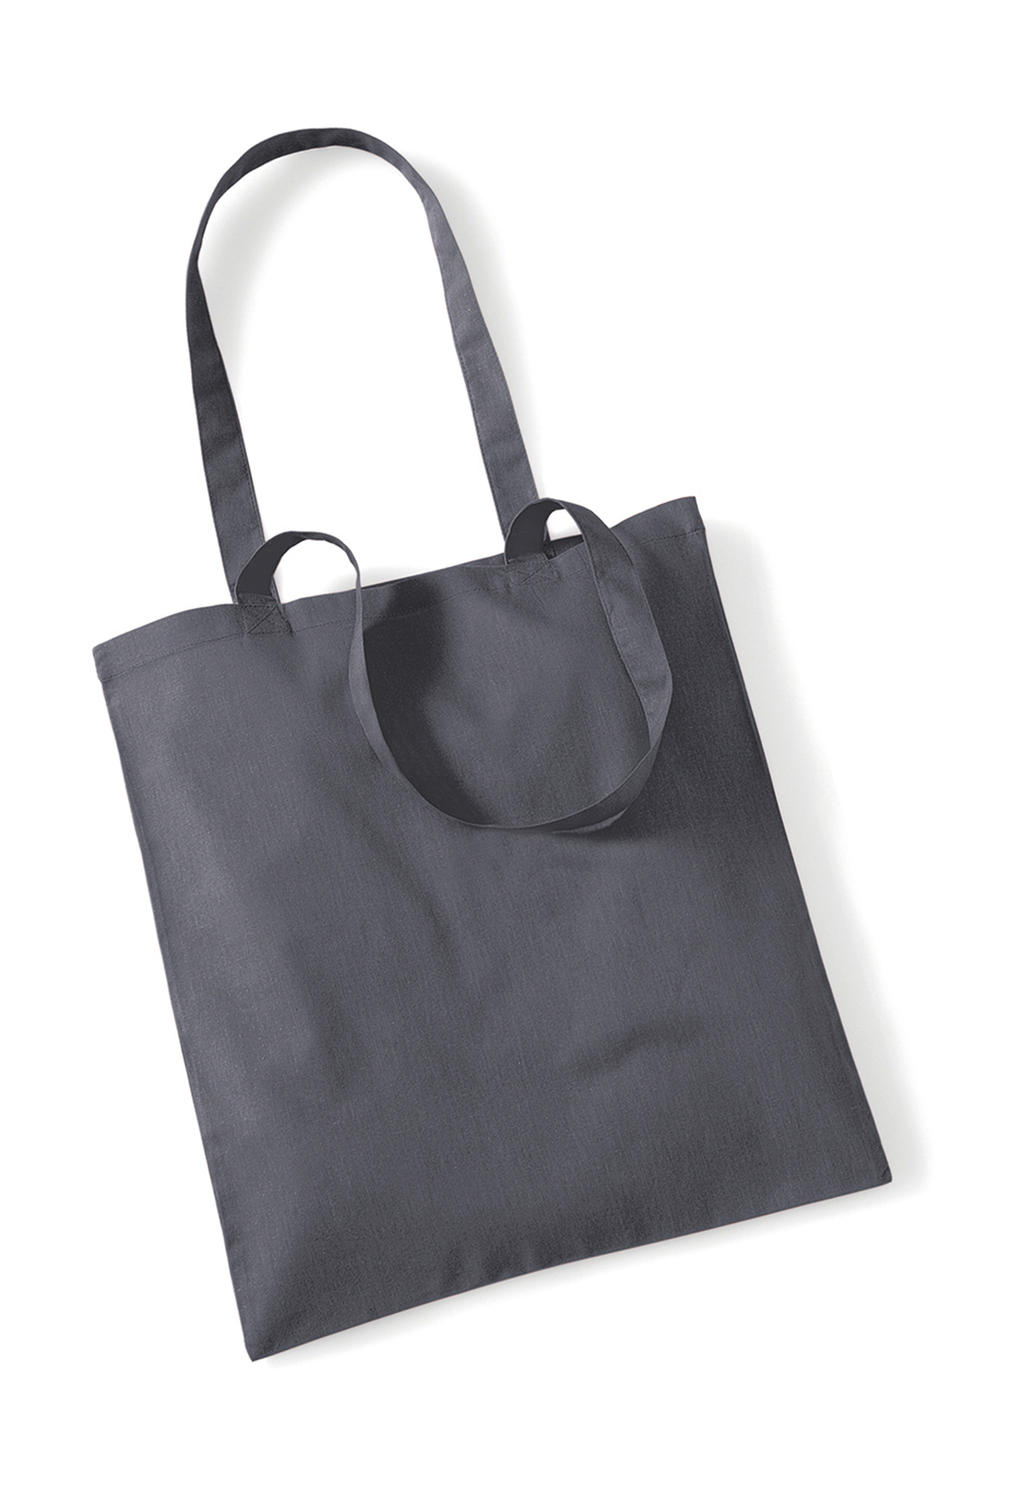  Bag for Life - Long Handles in Farbe Graphite